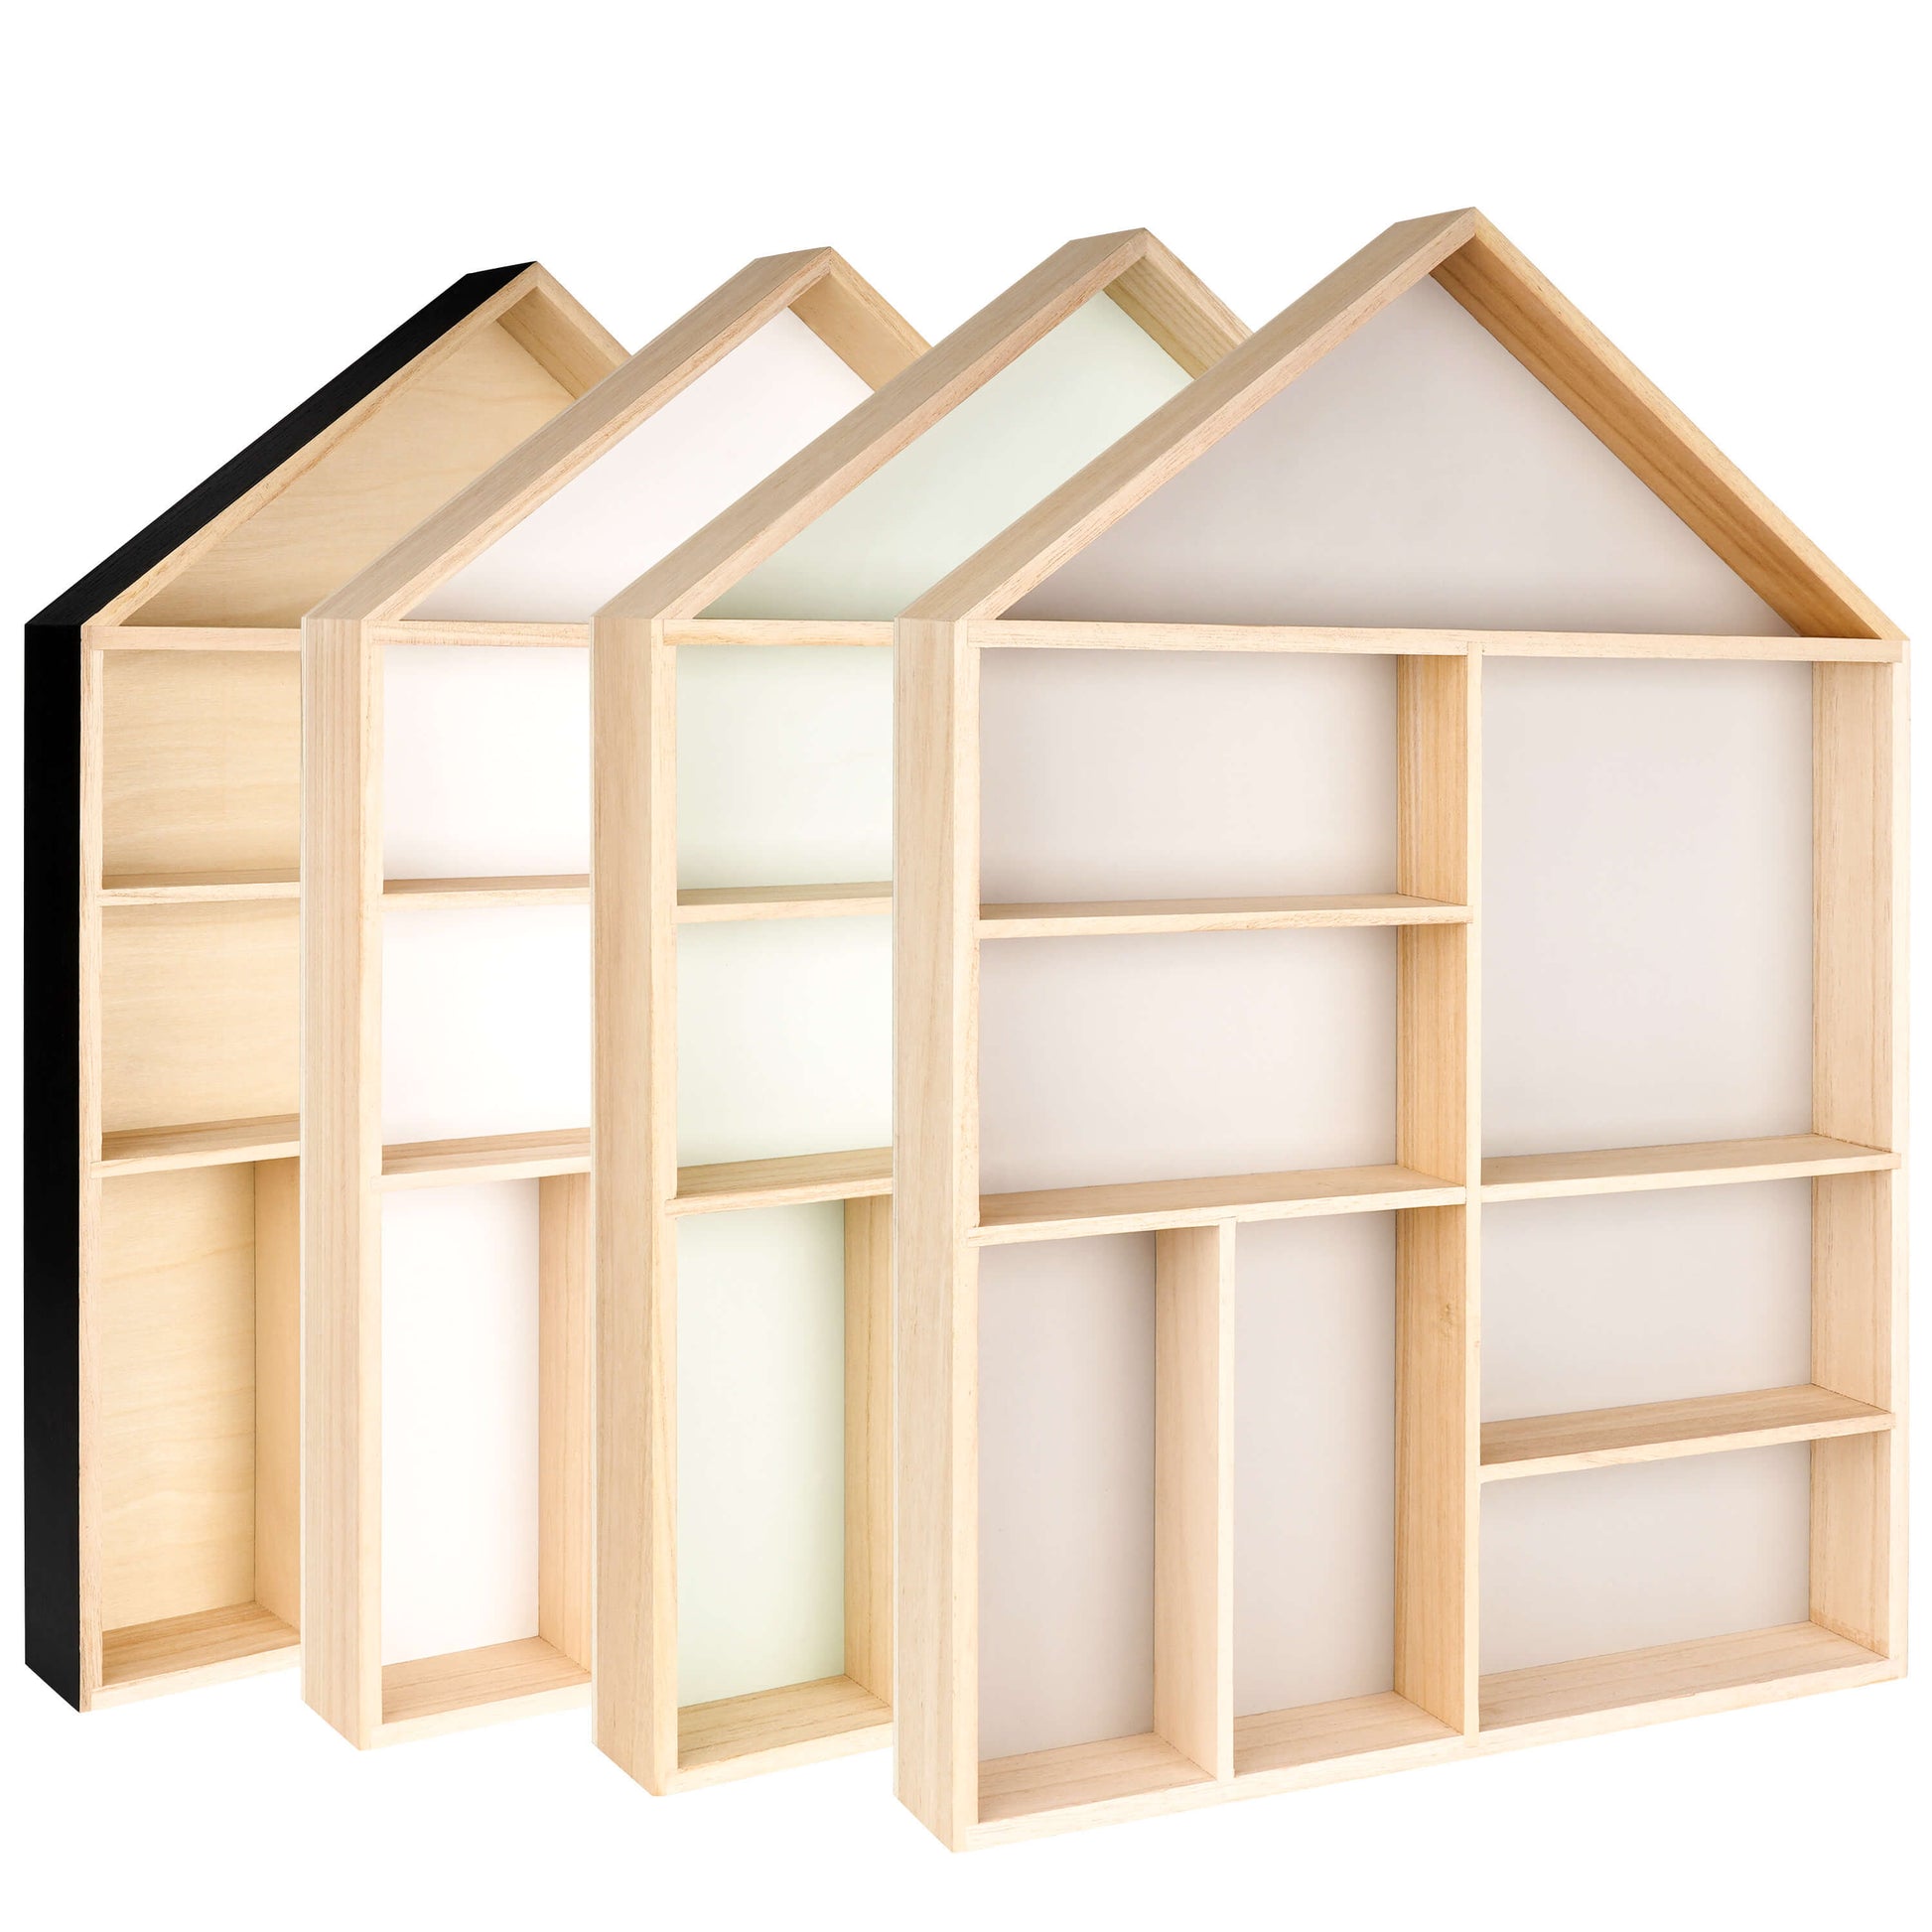 House shaped wooden toy display shelf - all color variations displayed side by side (side view)